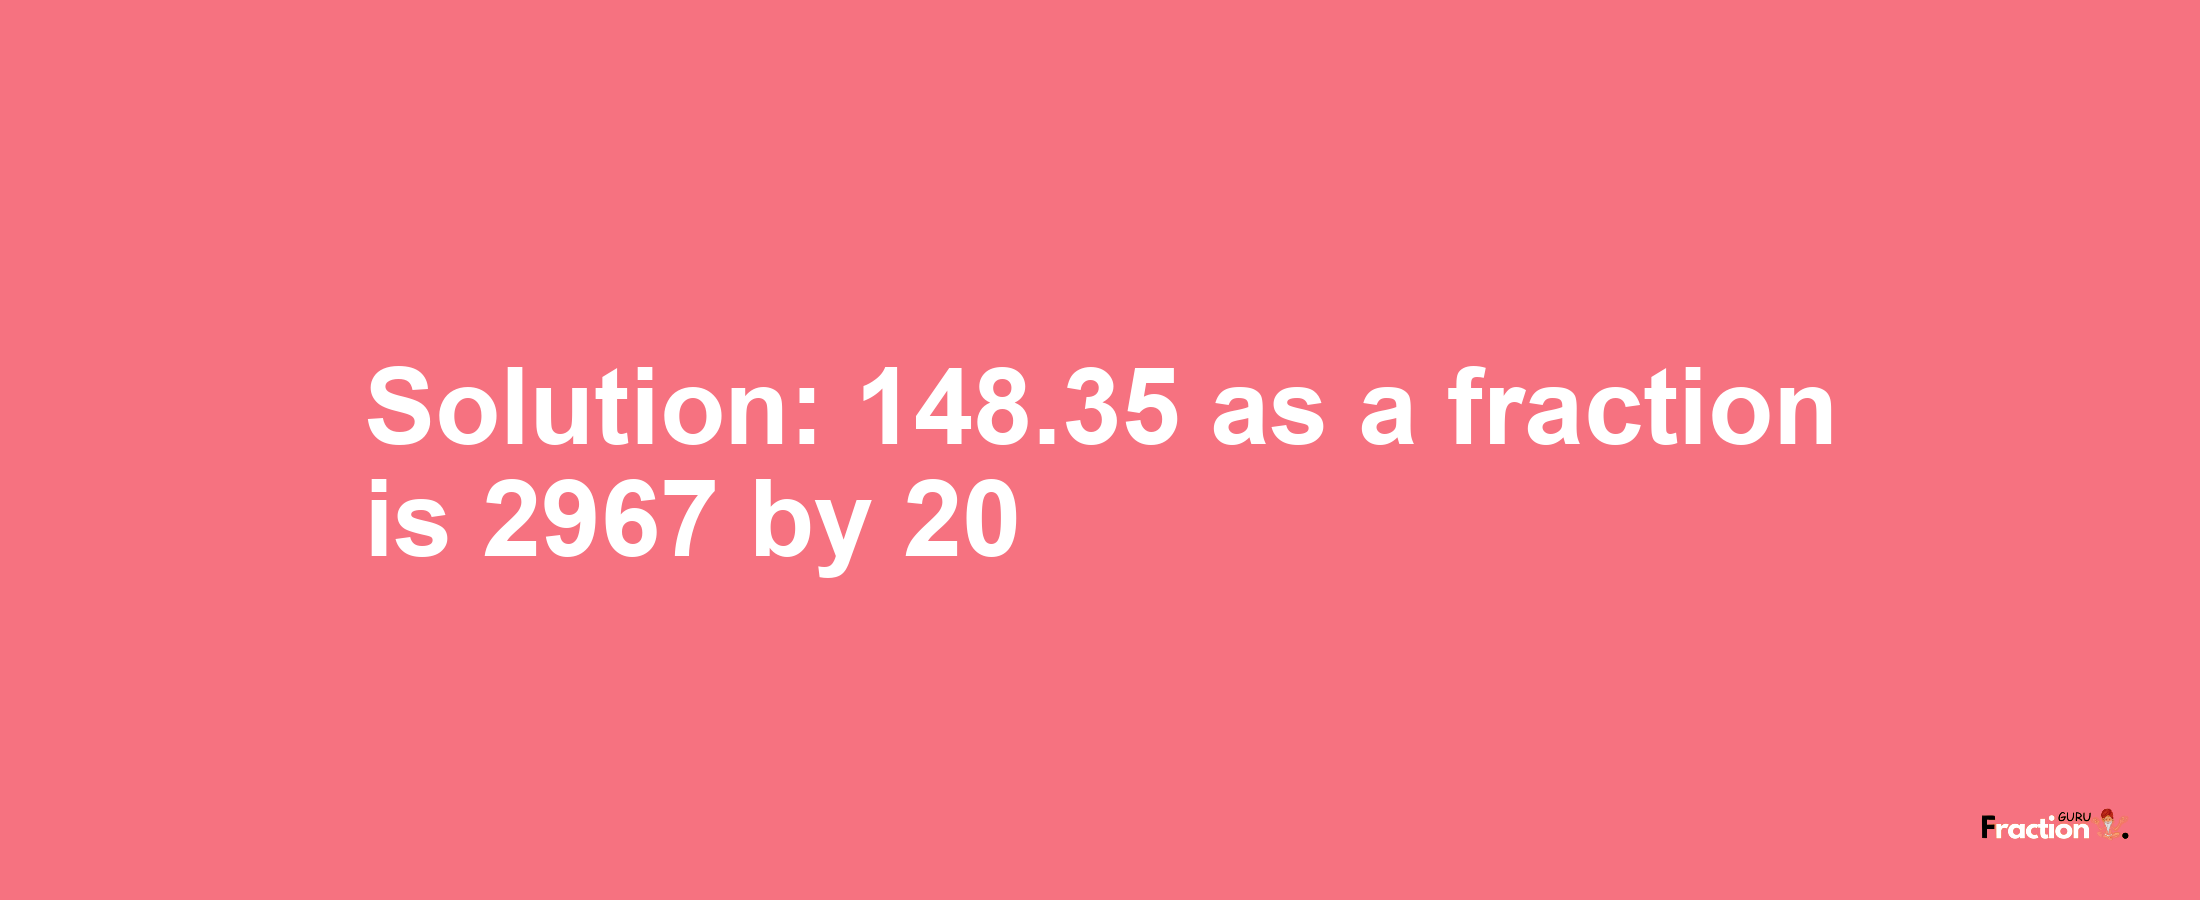 Solution:148.35 as a fraction is 2967/20